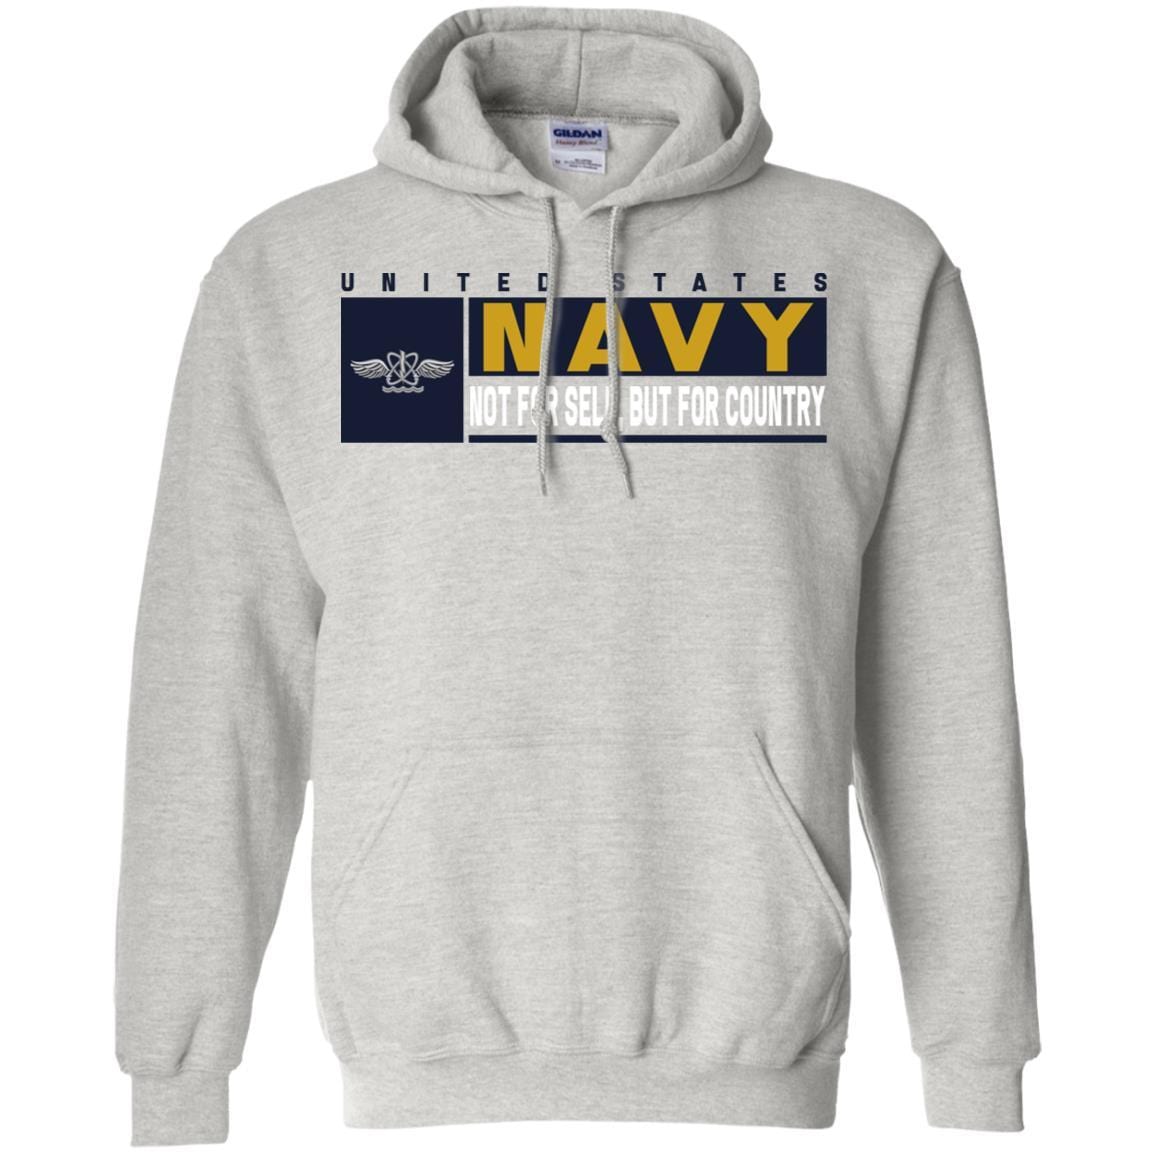 U.S Navy Naval aircrewman Navy AW- Not for self Long Sleeve - Pullover Hoodie-TShirt-Navy-Veterans Nation